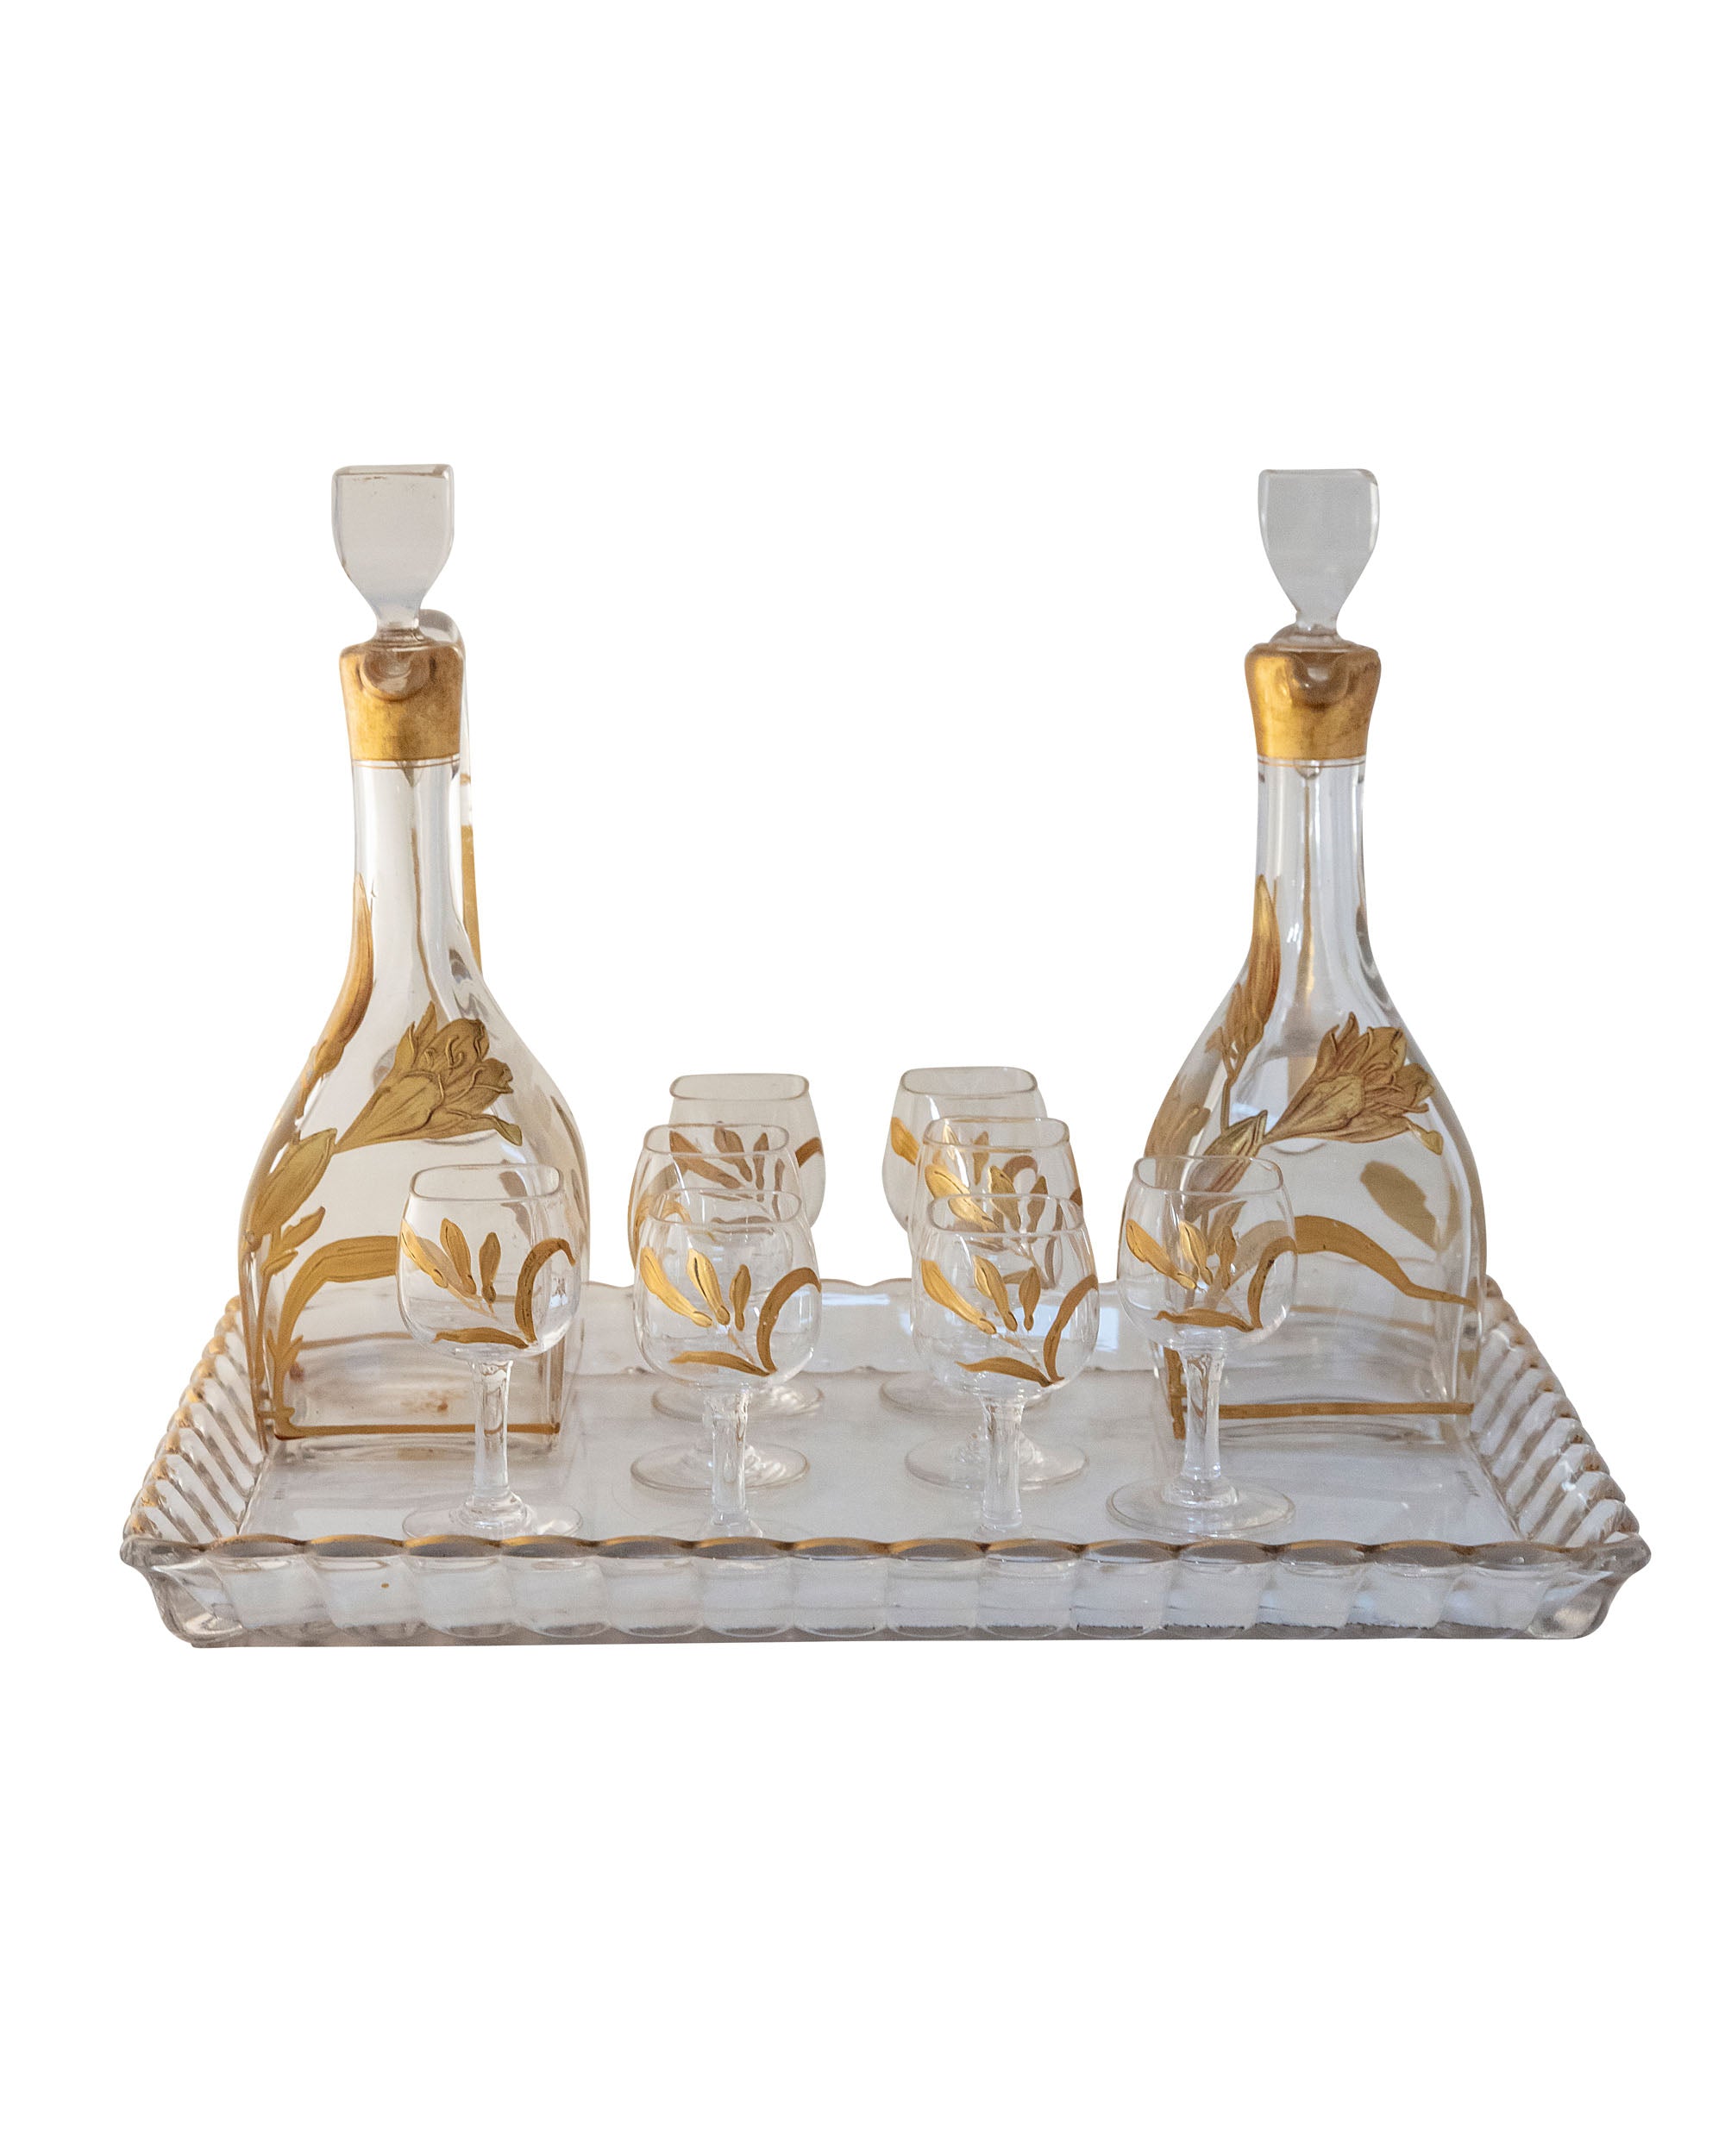  Set of eight glasses and two liquor bottles made of glass and golden paint with floral motifs and a tray